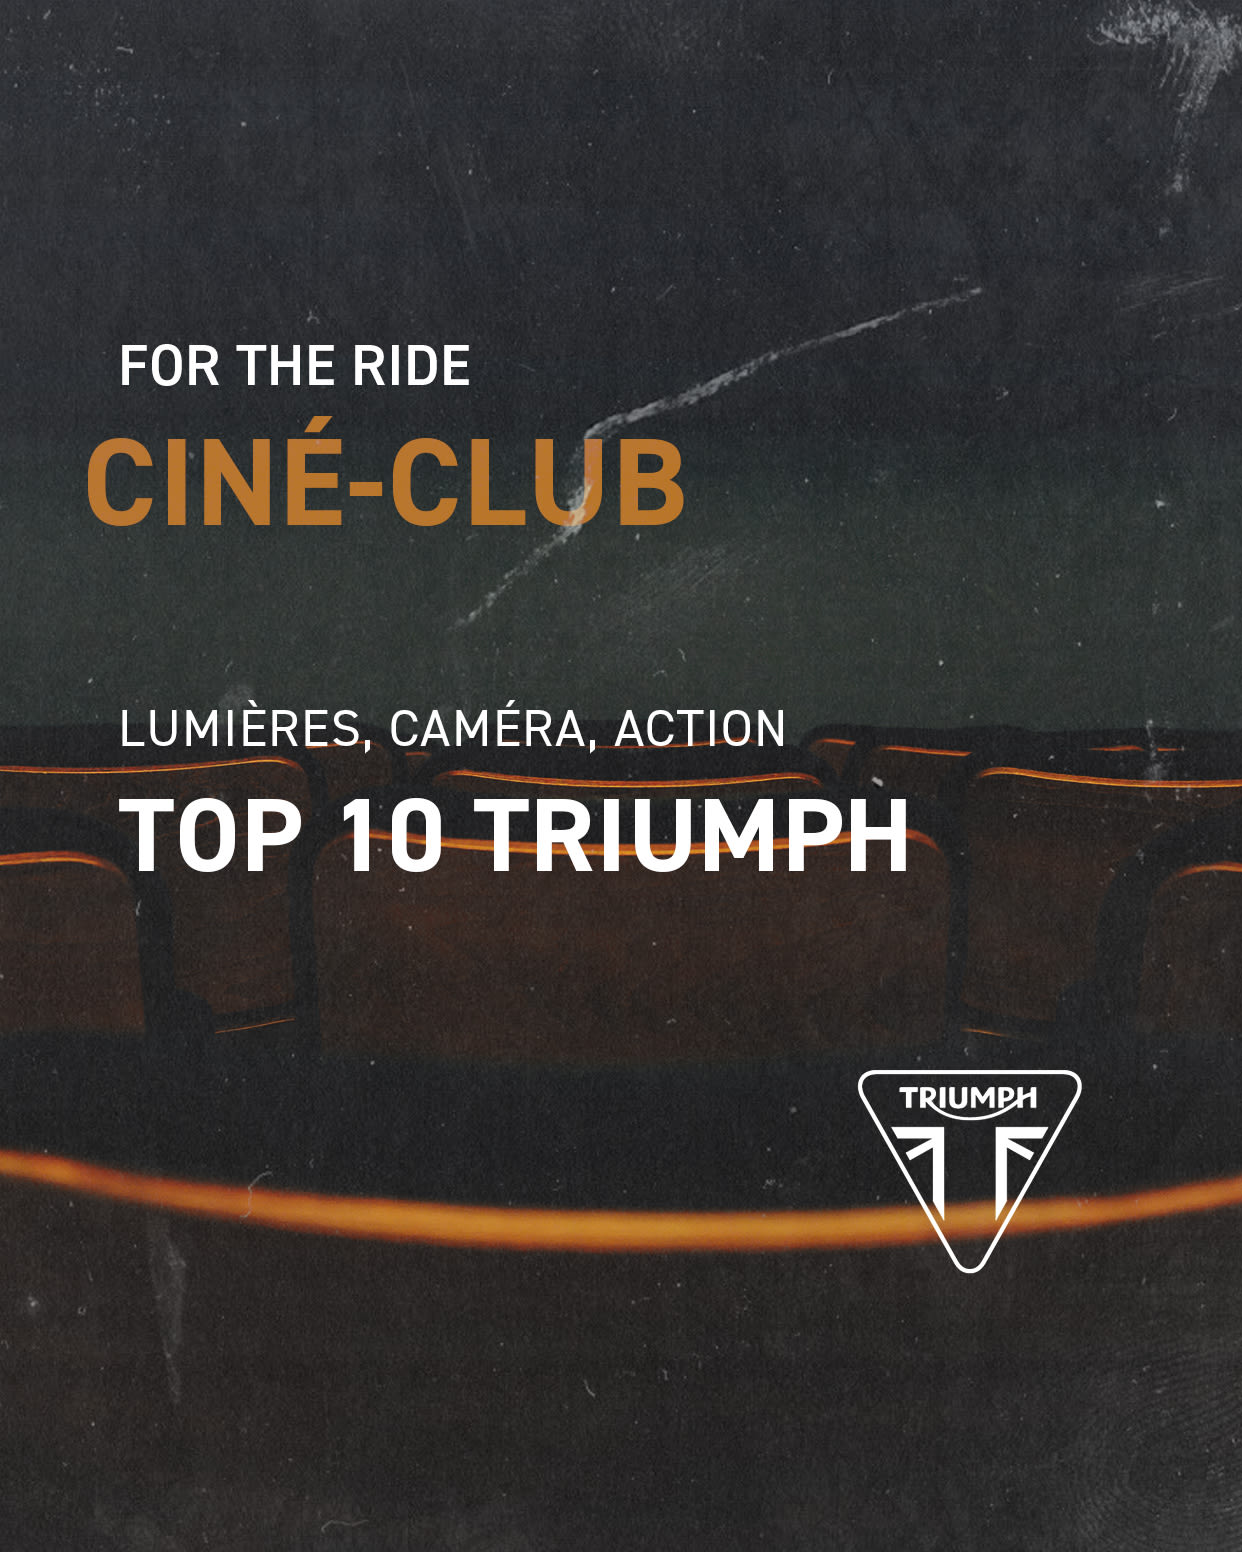 For the Ride top 10 